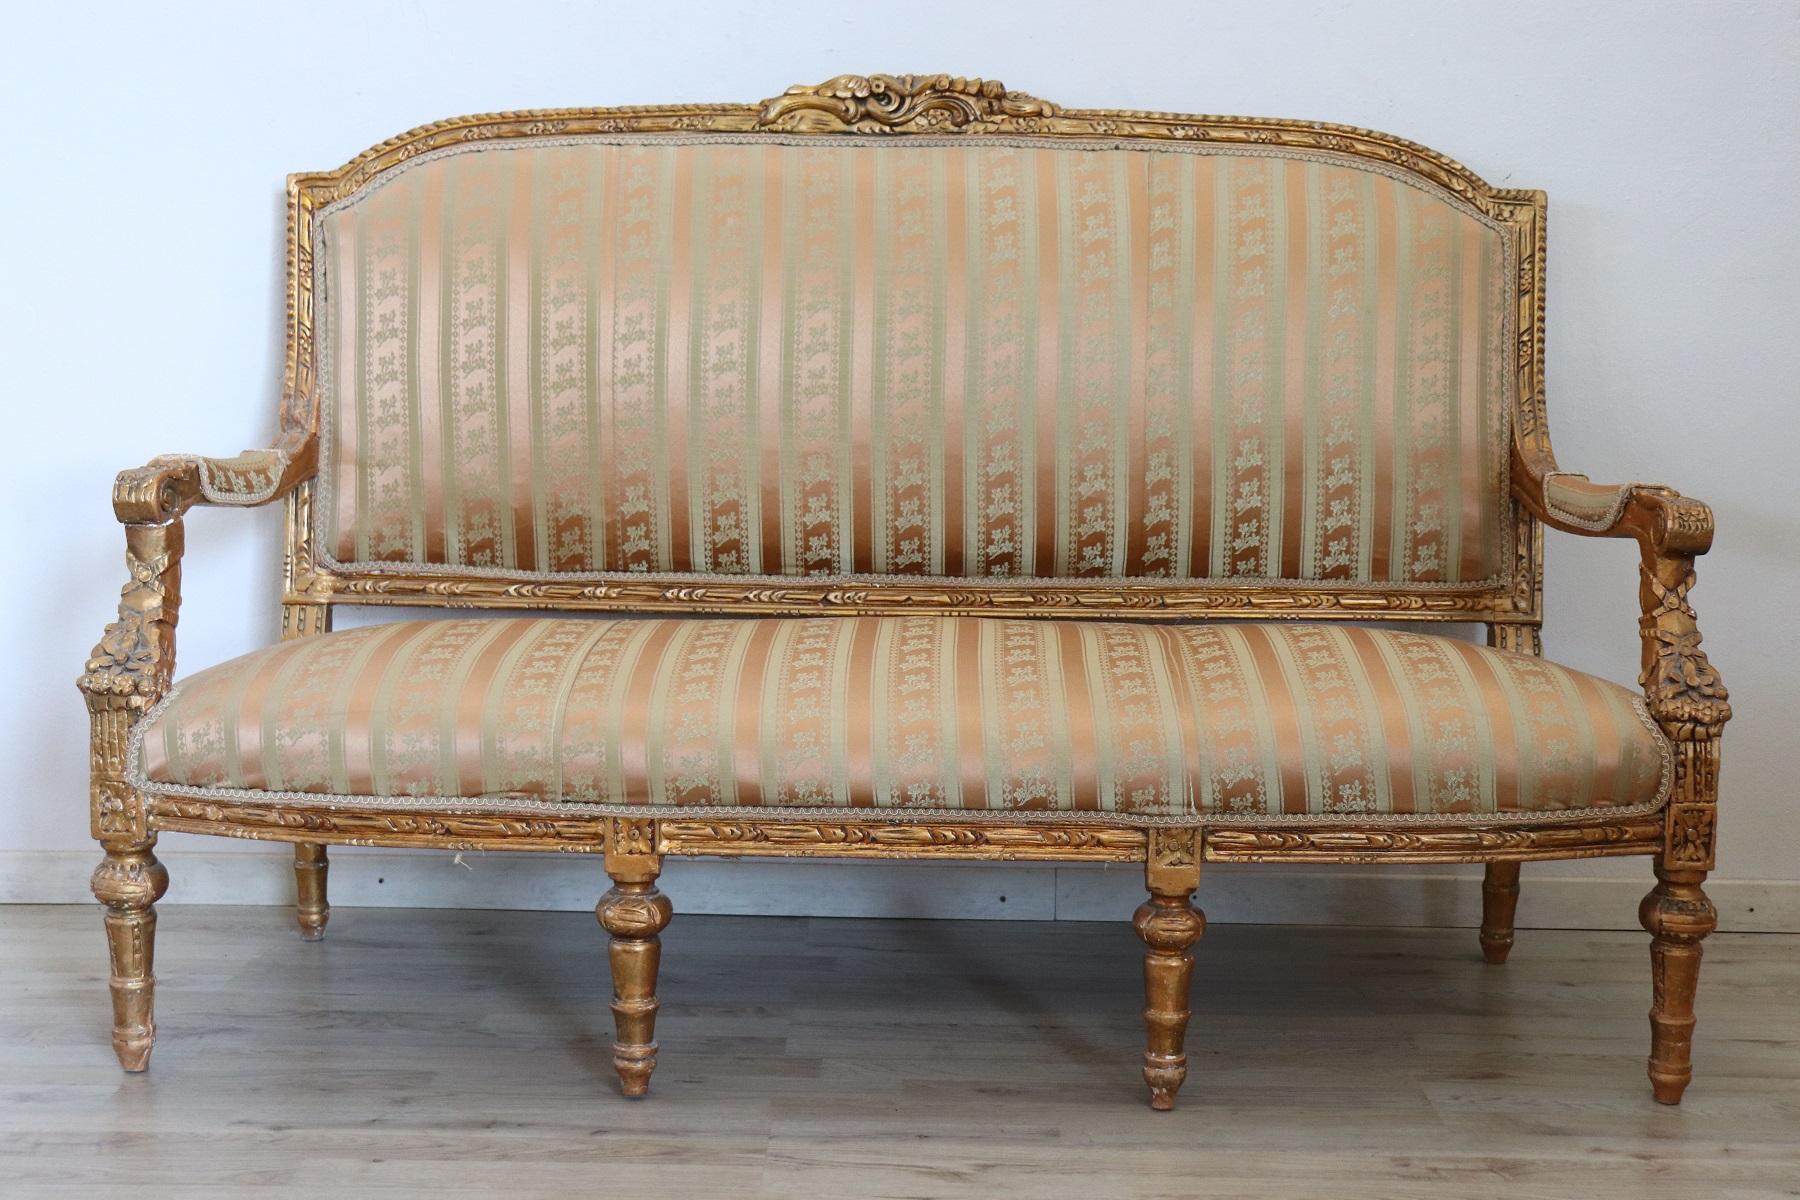 Rare complete Italian luxury Louis XVI style living room set includes:
1 large sofa
2 armchairs
Refined living room set in carved and gilded wood . Excellent condition of the wood used small sign of use.
The living room comes from an important